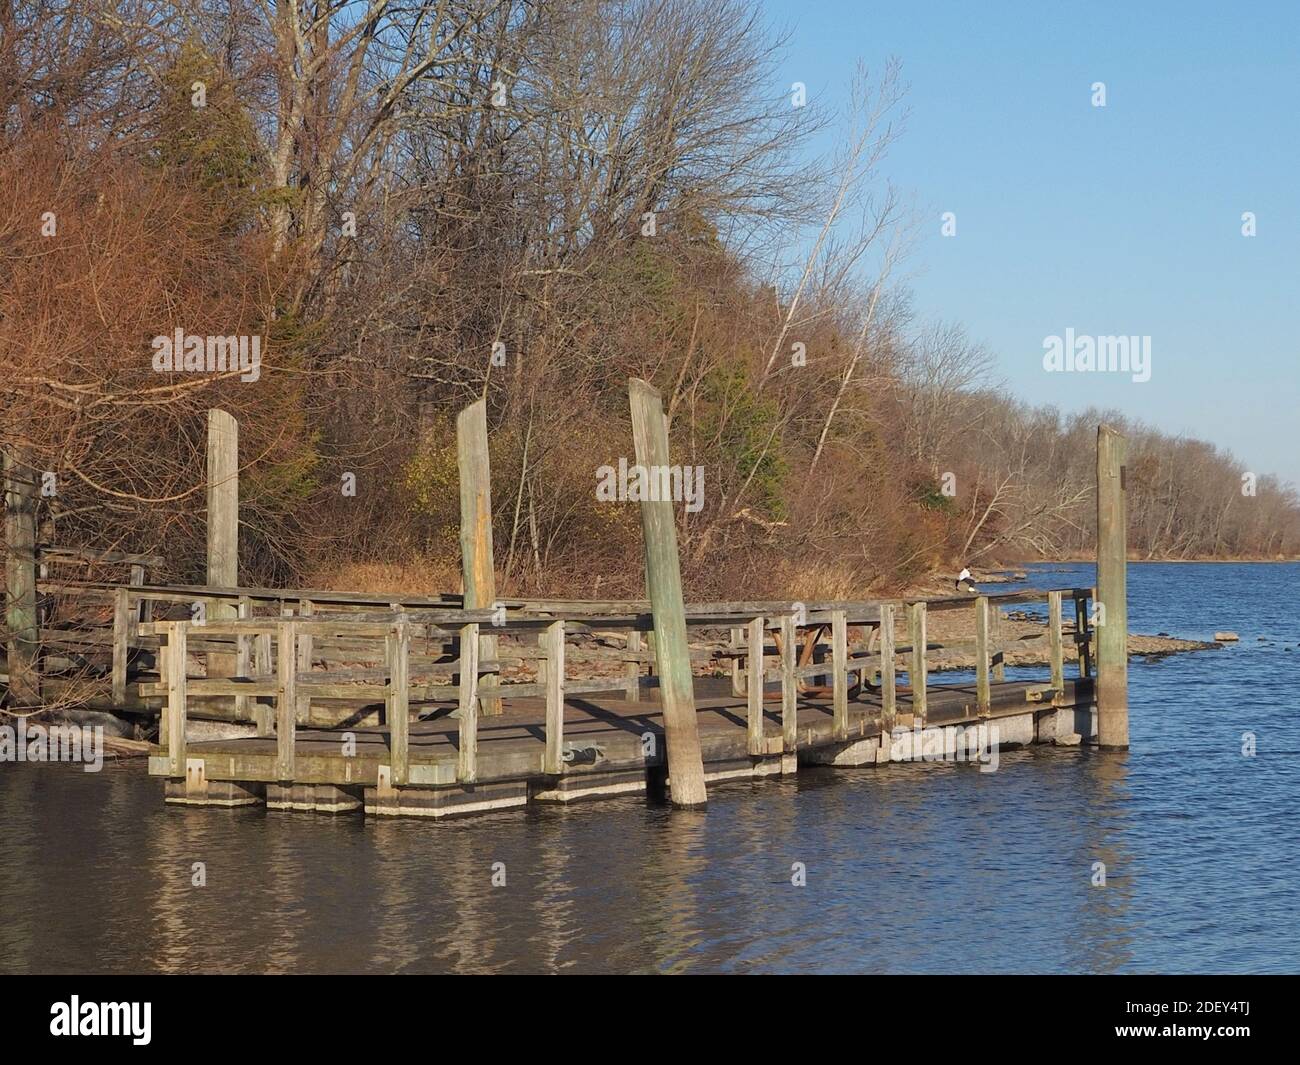 The old wooden dock is by the lake. Stock Photo